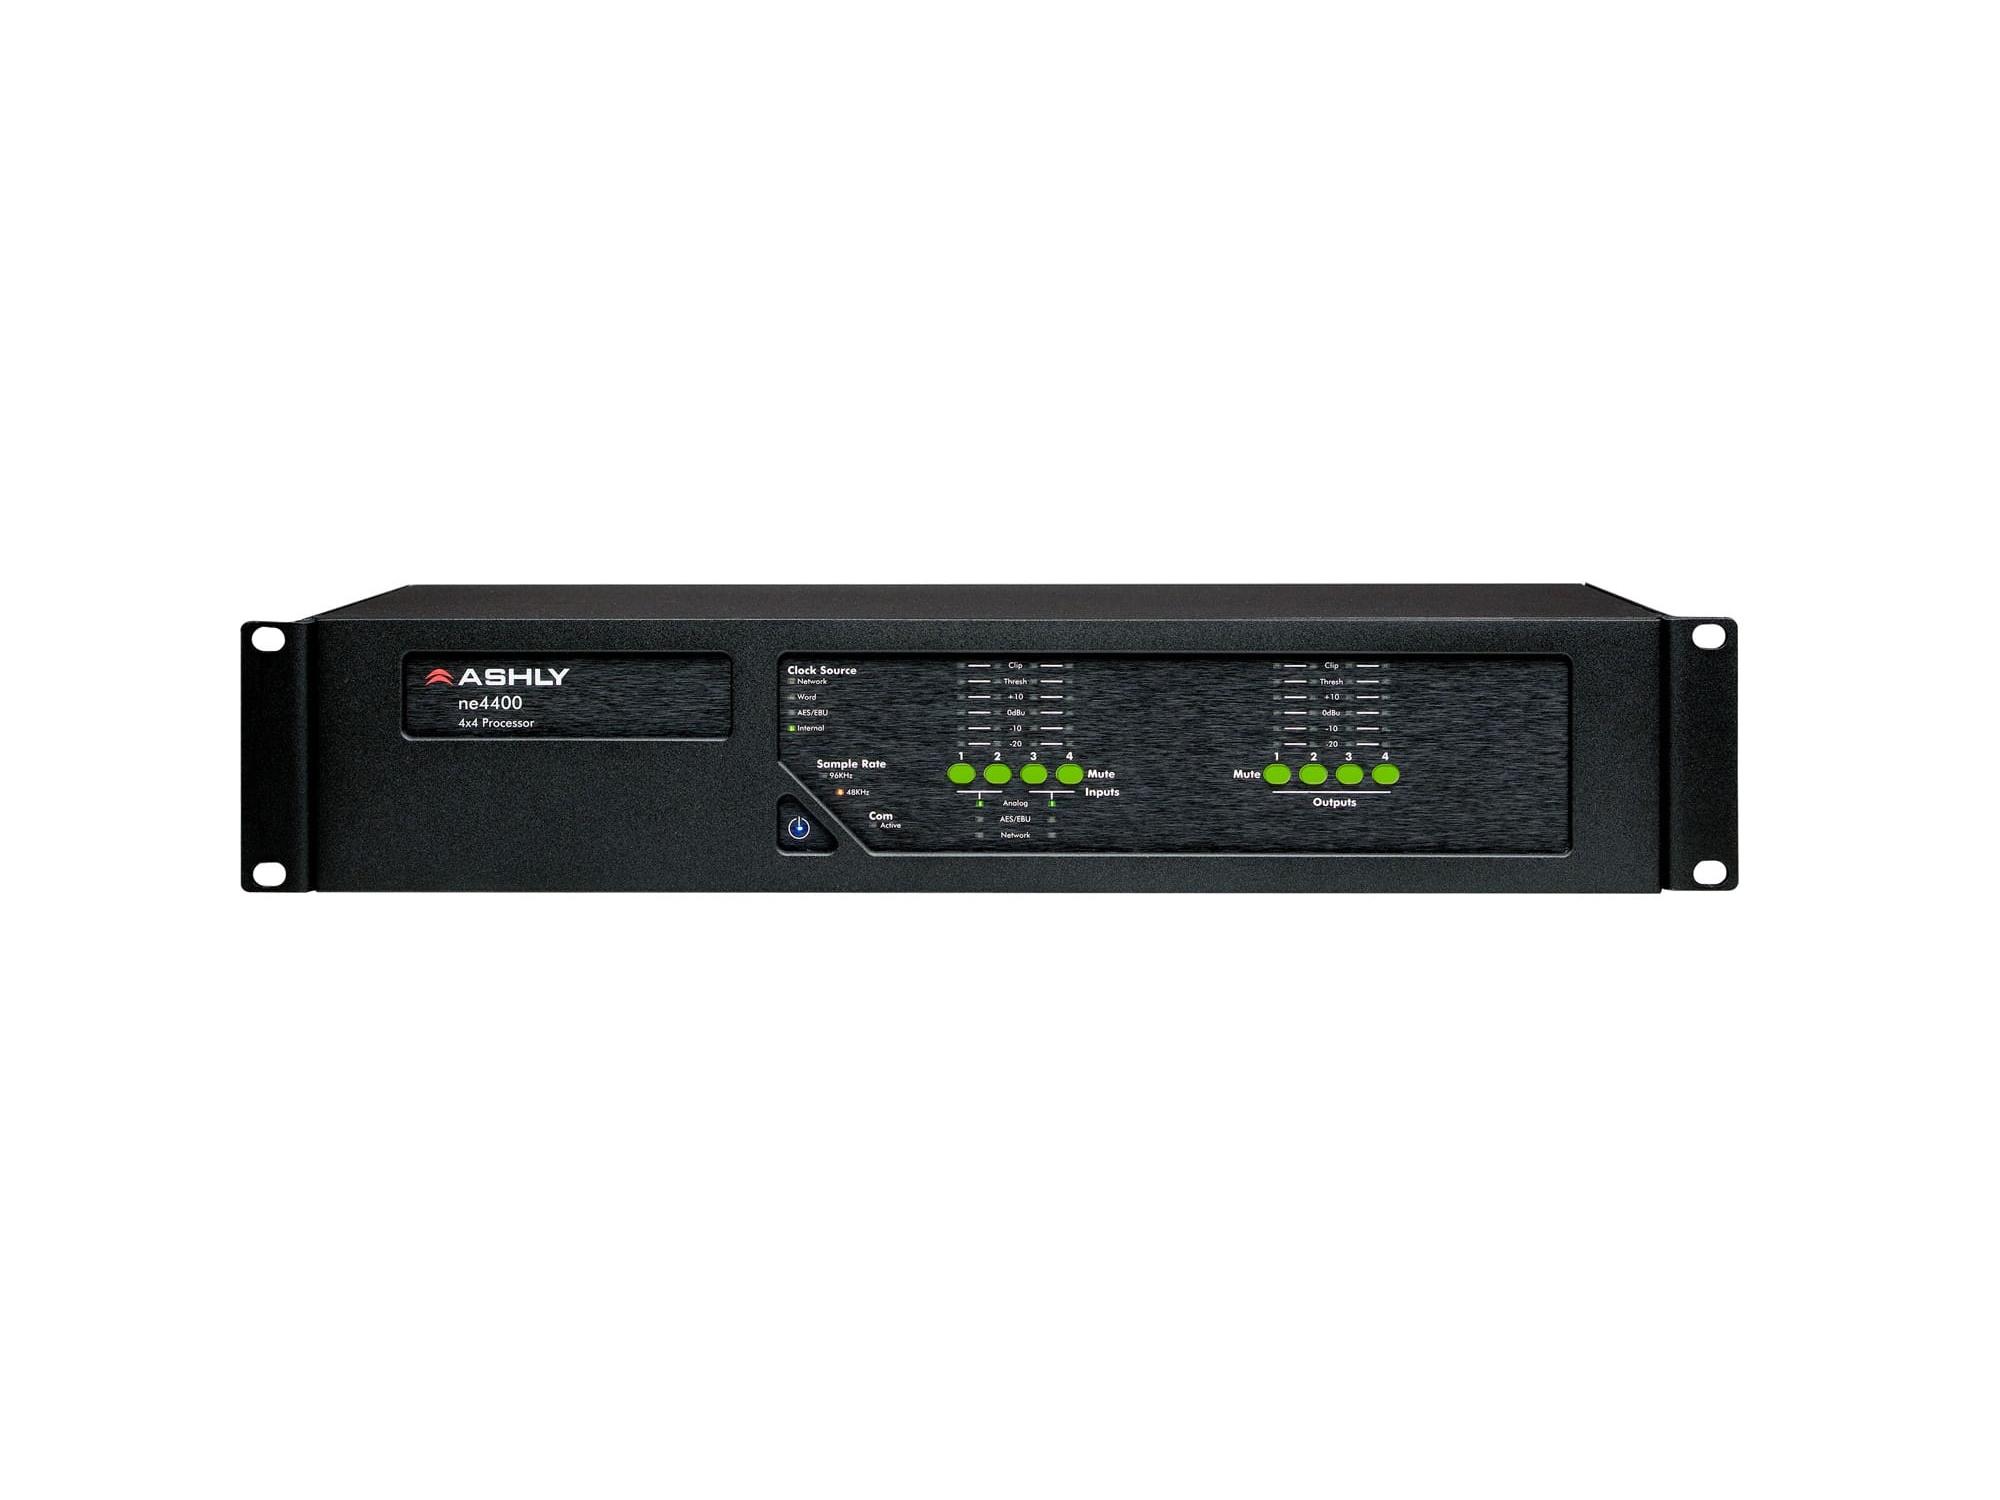 ne4400mt 4x4 Protea DSP Audio System Processor with 4-Channel Mic Inputs and Dante Card by Ashly